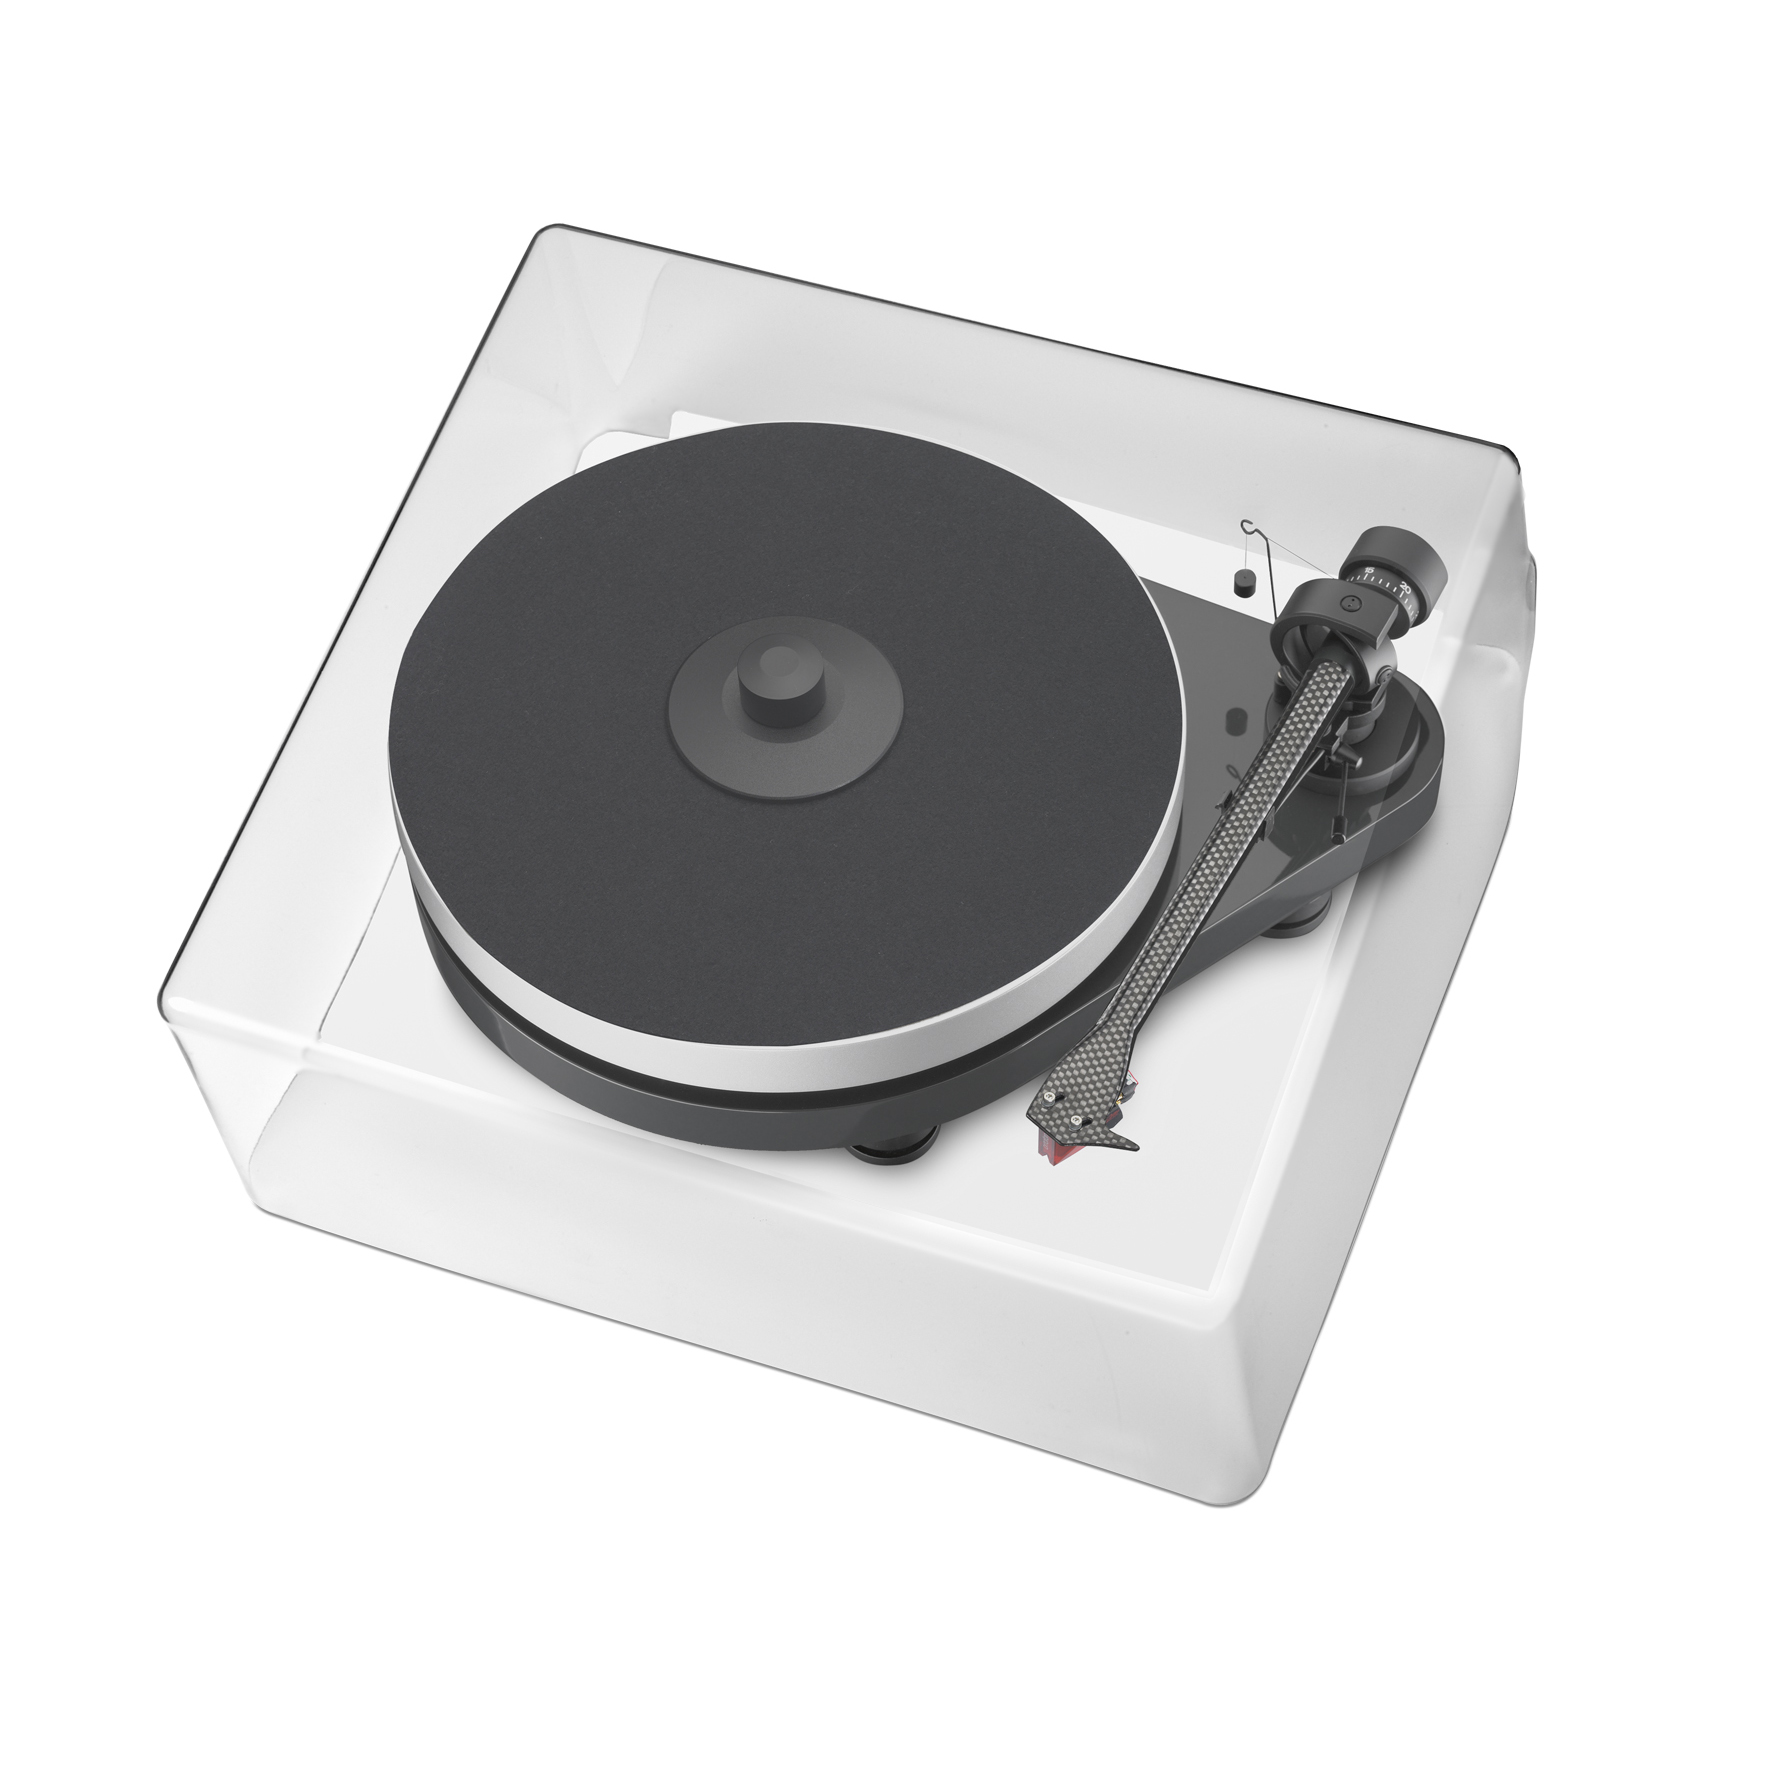 https://www.audioteka.it/images/stories/virtuemart/product/pro-ject_cover-it_rpm.jpg